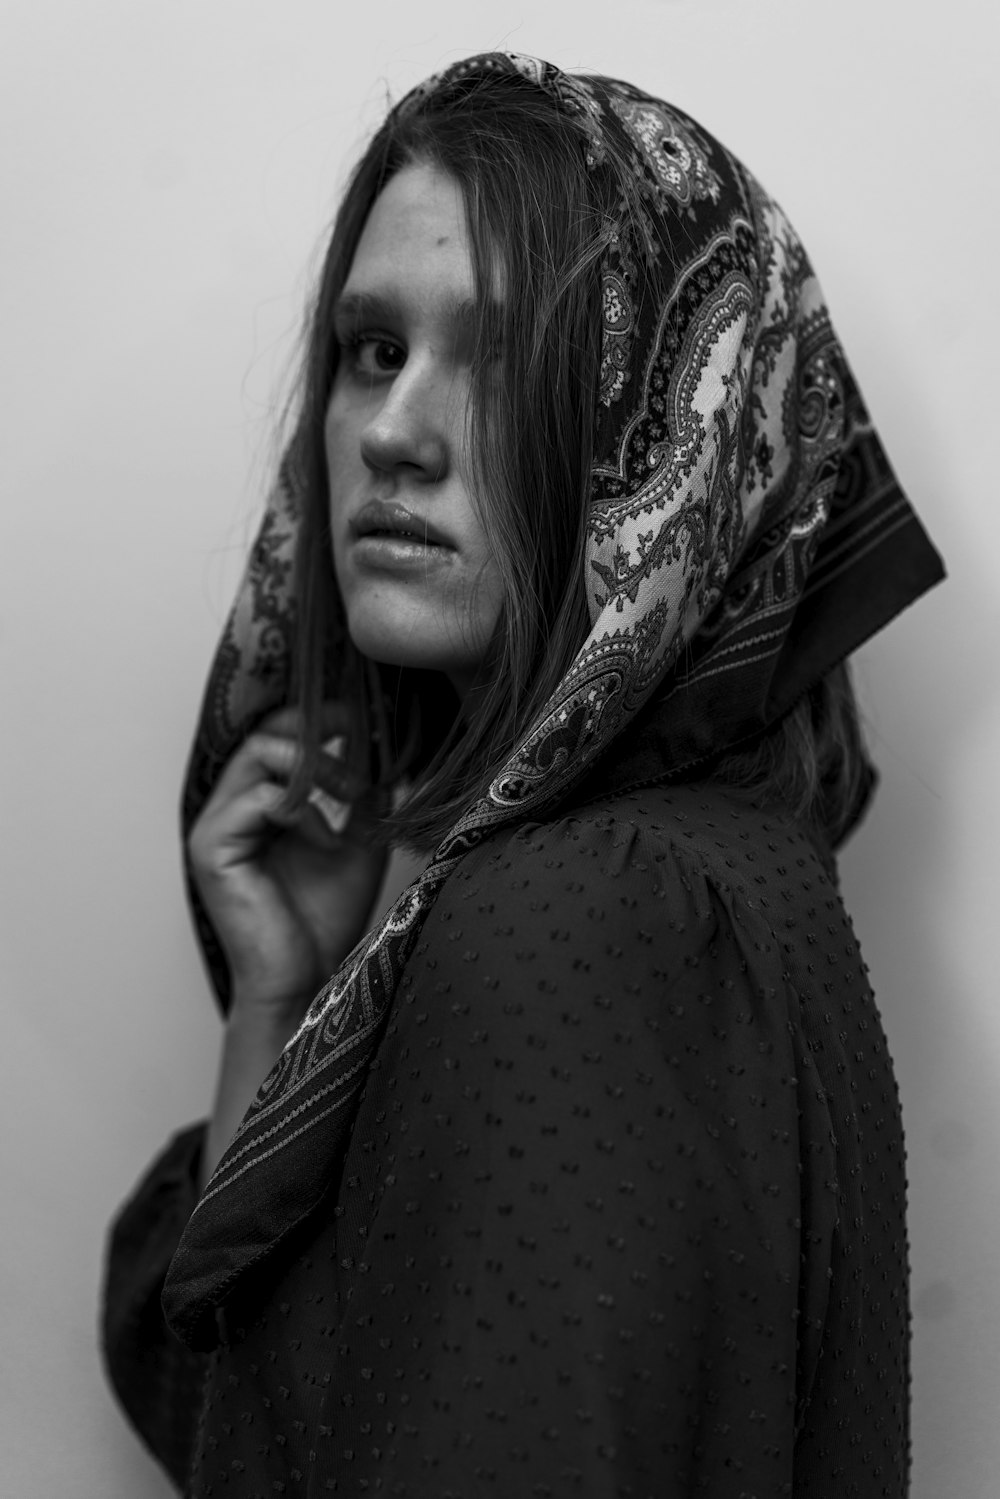 a woman with a scarf on her head